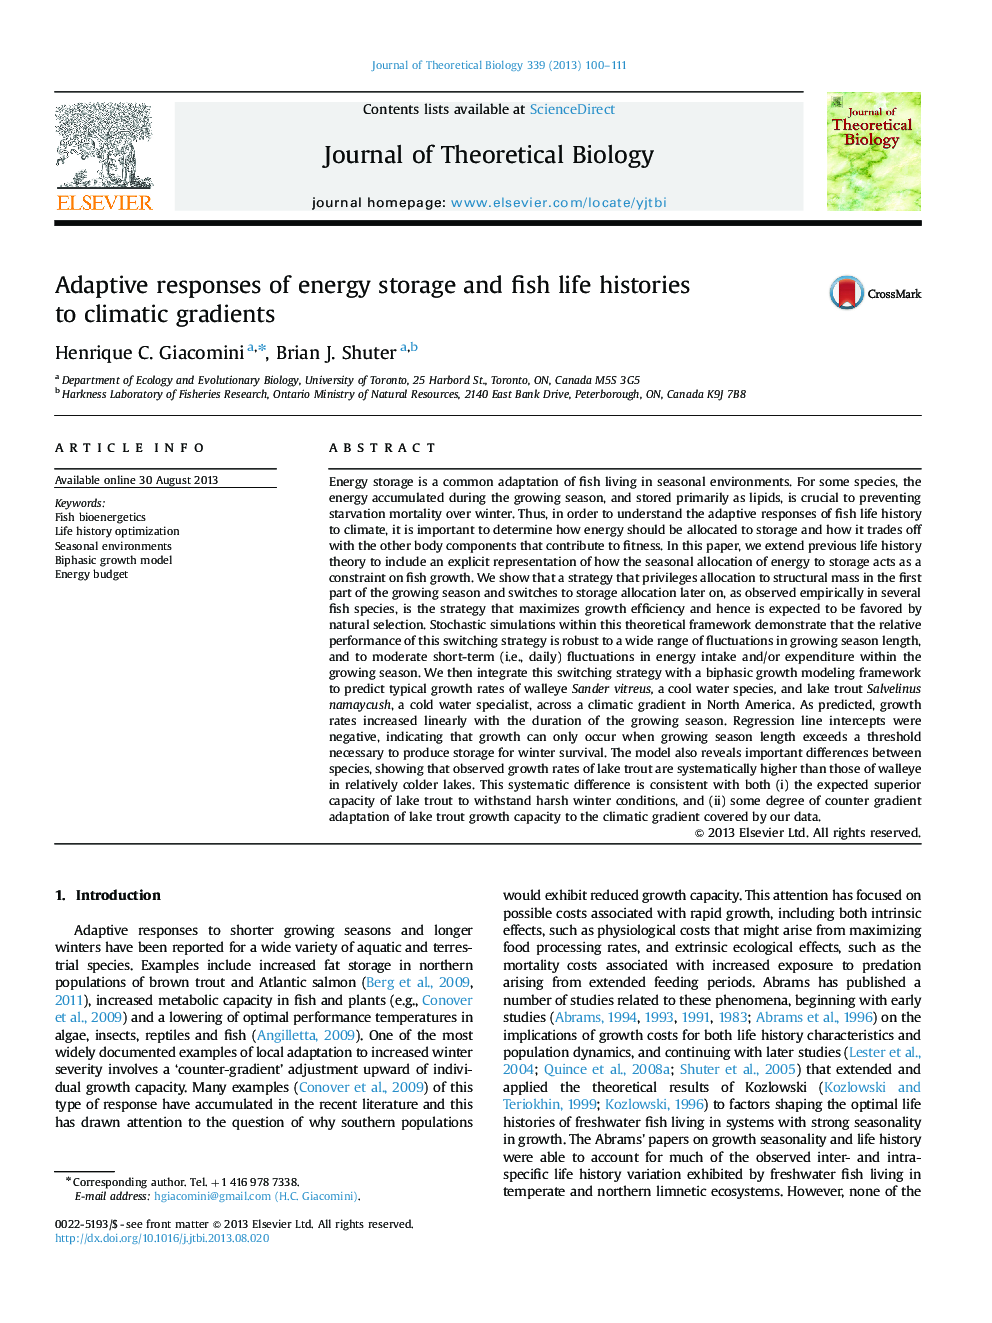 Adaptive responses of energy storage and fish life histories to climatic gradients